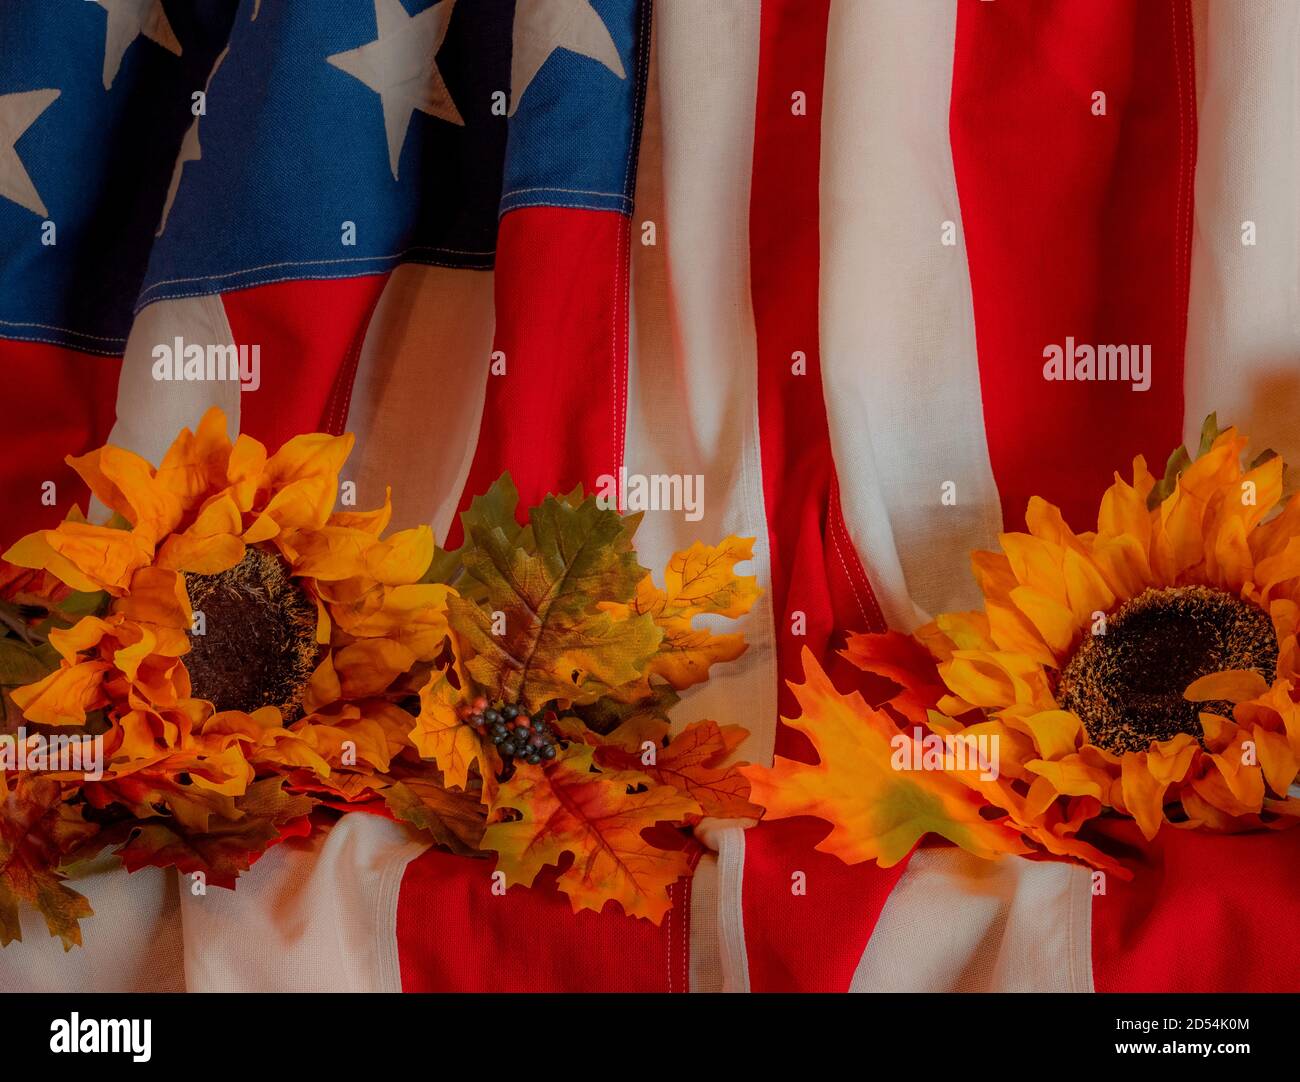 Sunflowers and fall leaves sit on on American flag that is draped and glows in the warm light. Stock Photo